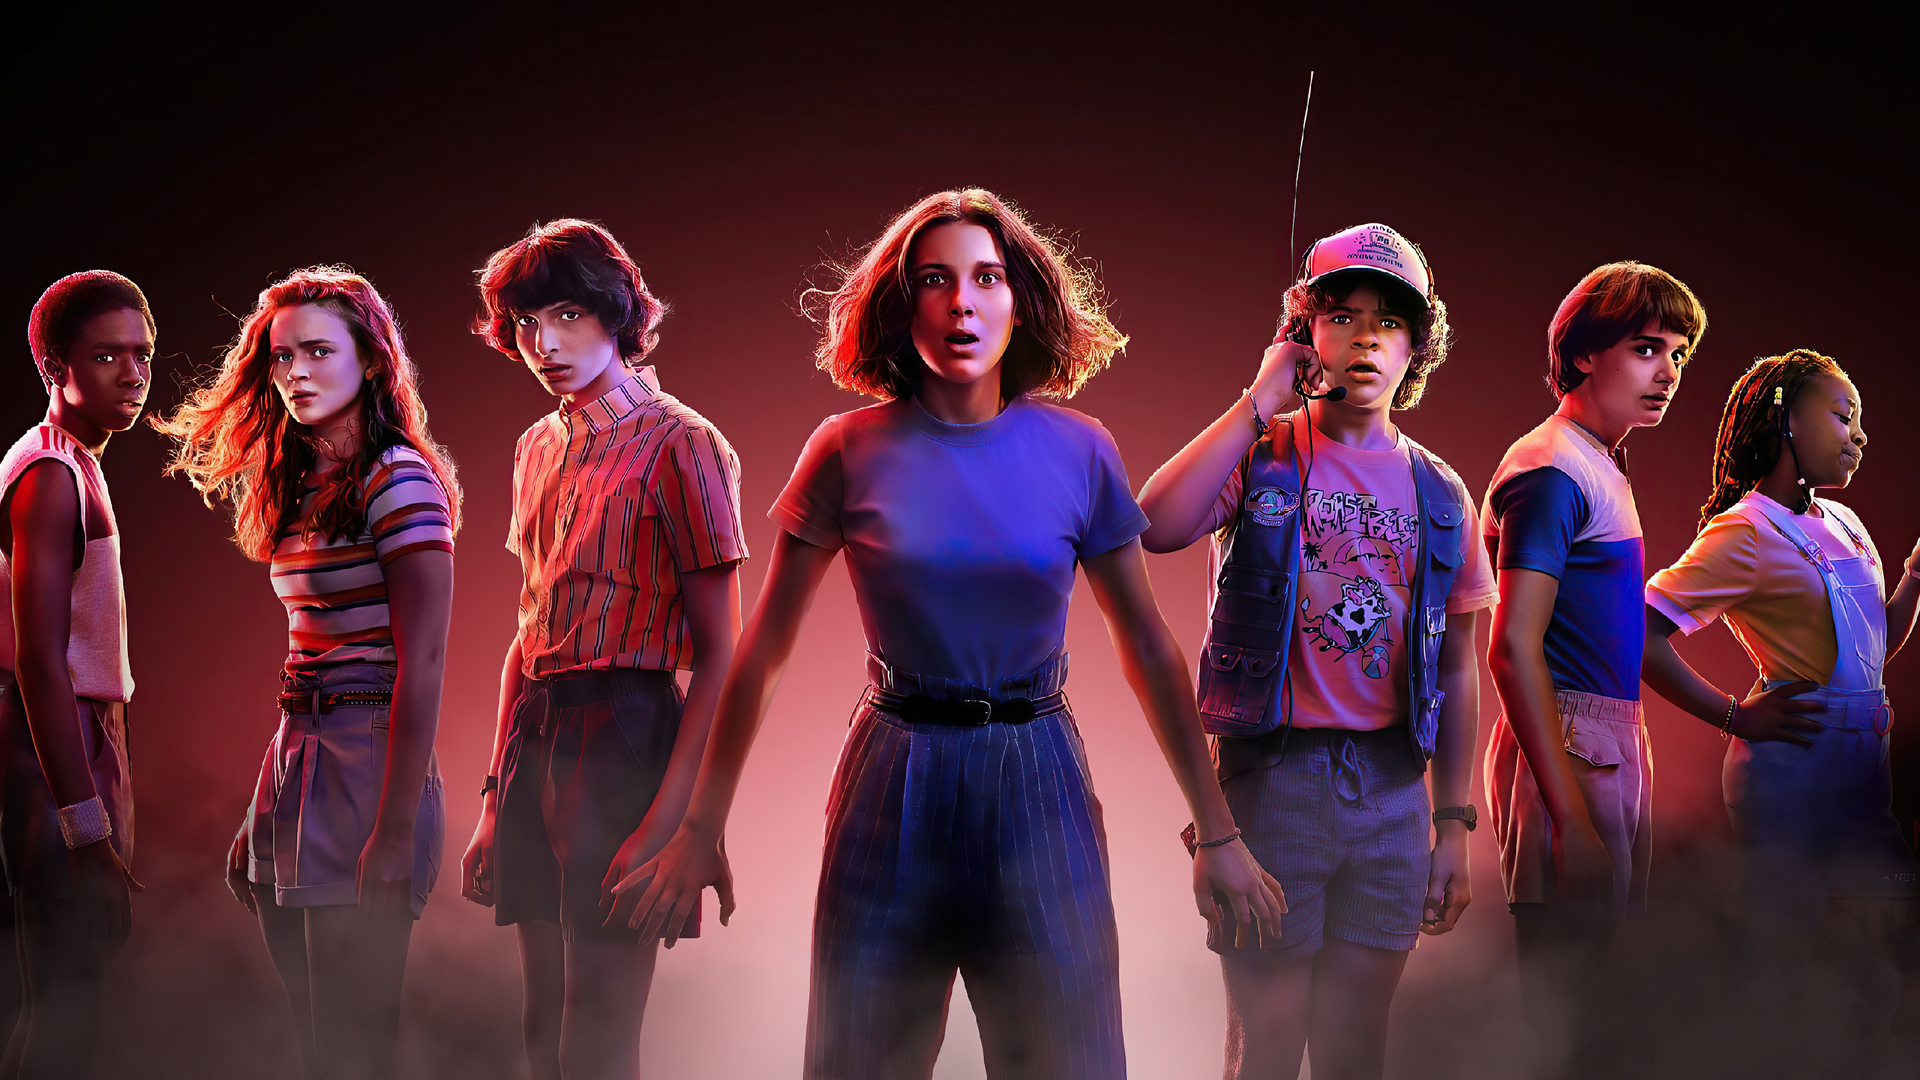 Fans Share Their Emotional Investment in 'Stranger Things' Characters With the Reasons Behind